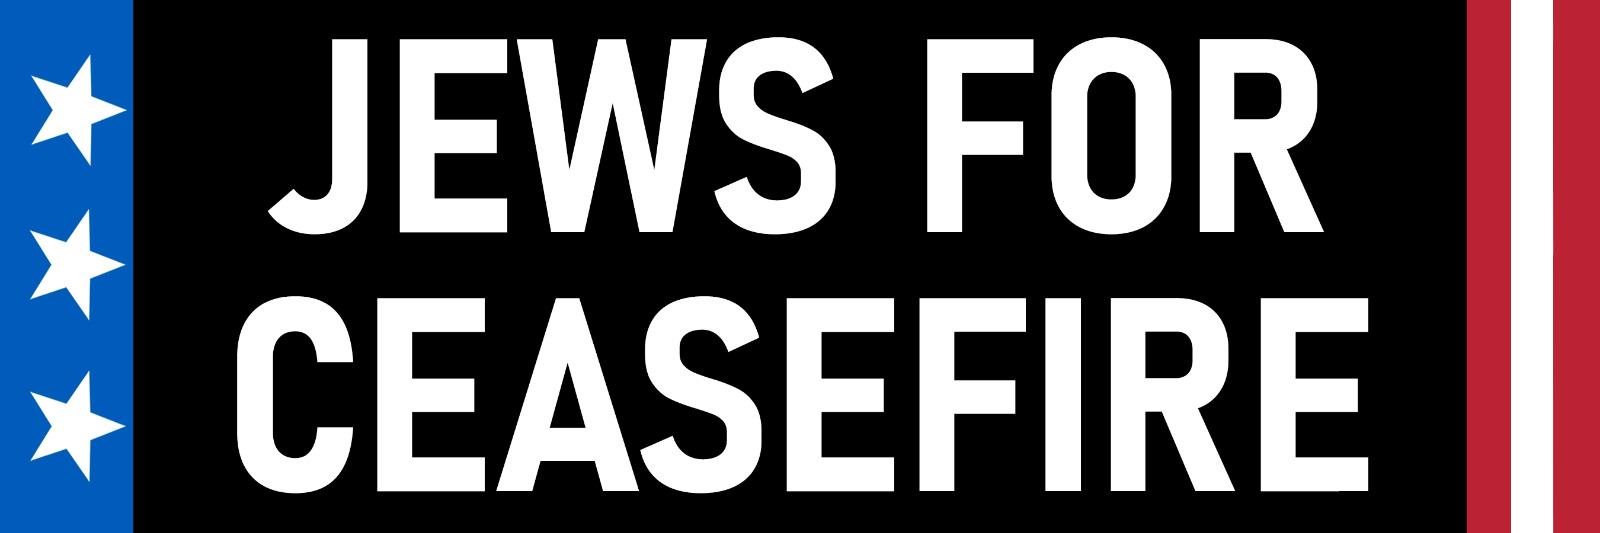 Jews for Ceasefire Magnet Large 3x9 Bumper Sticker Size Peace in Israel